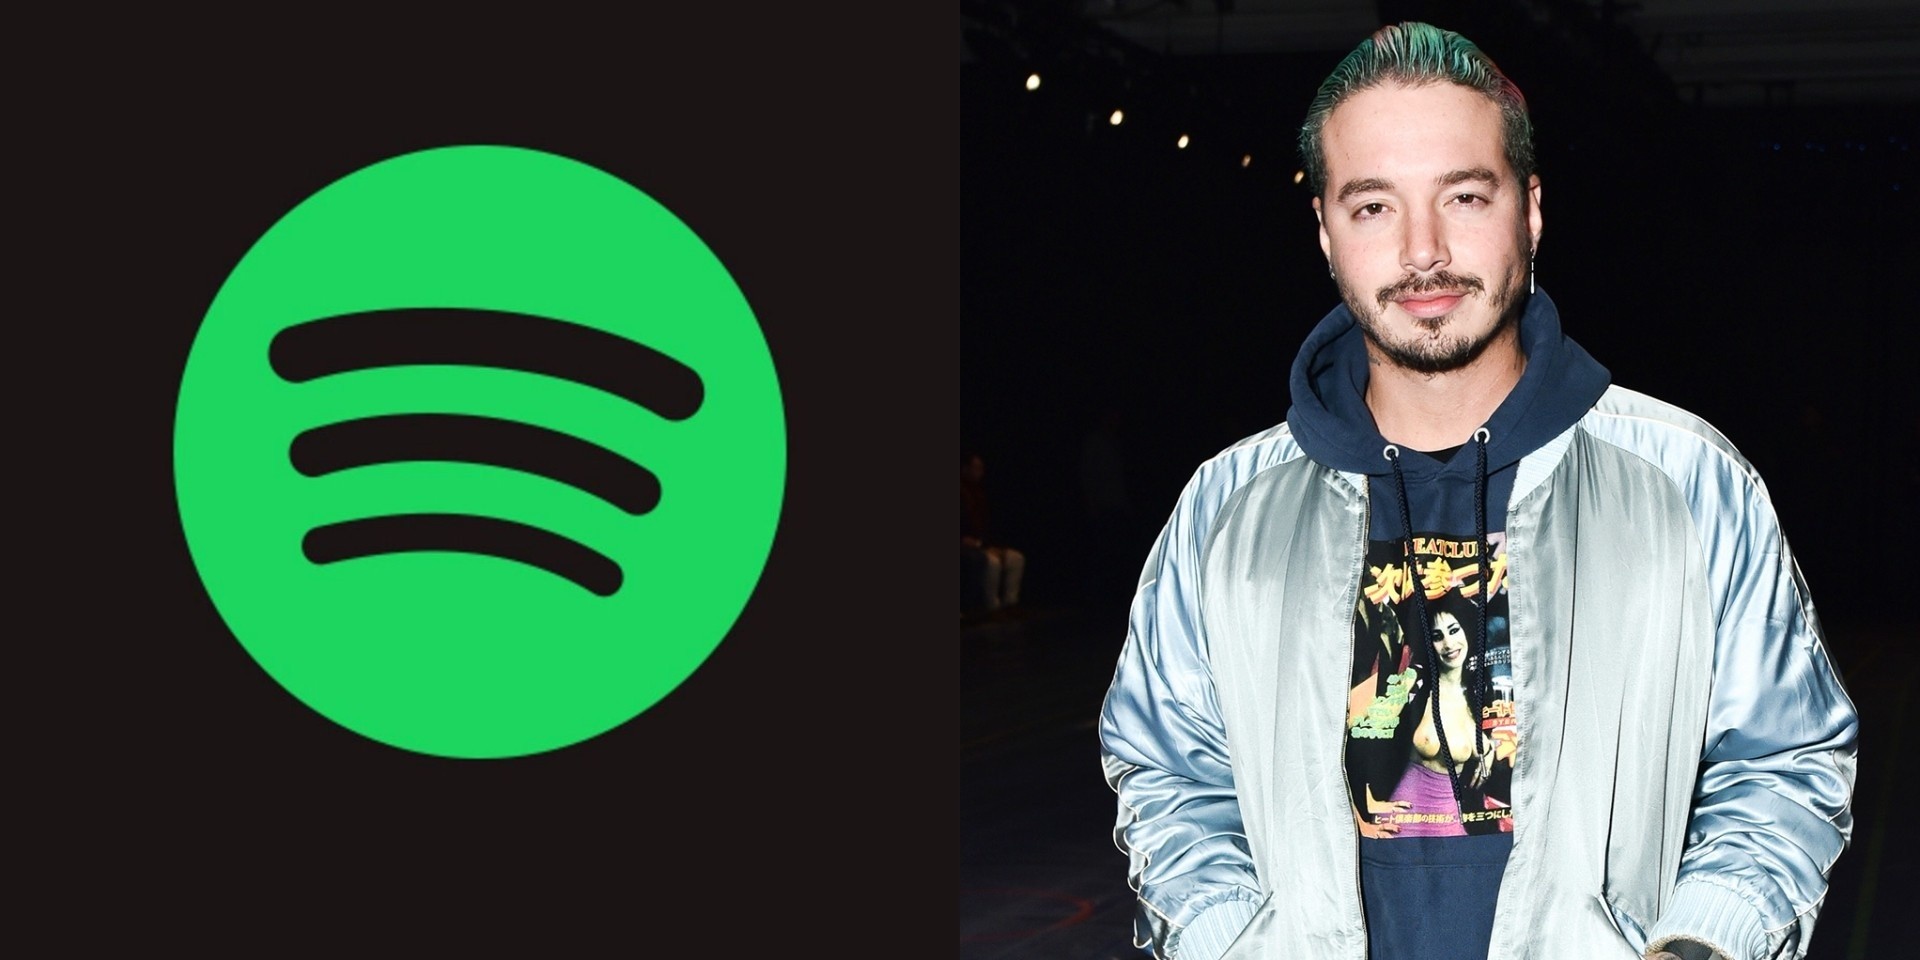 Spotify aims to broaden musical diversity with the Global Cultures Initiative